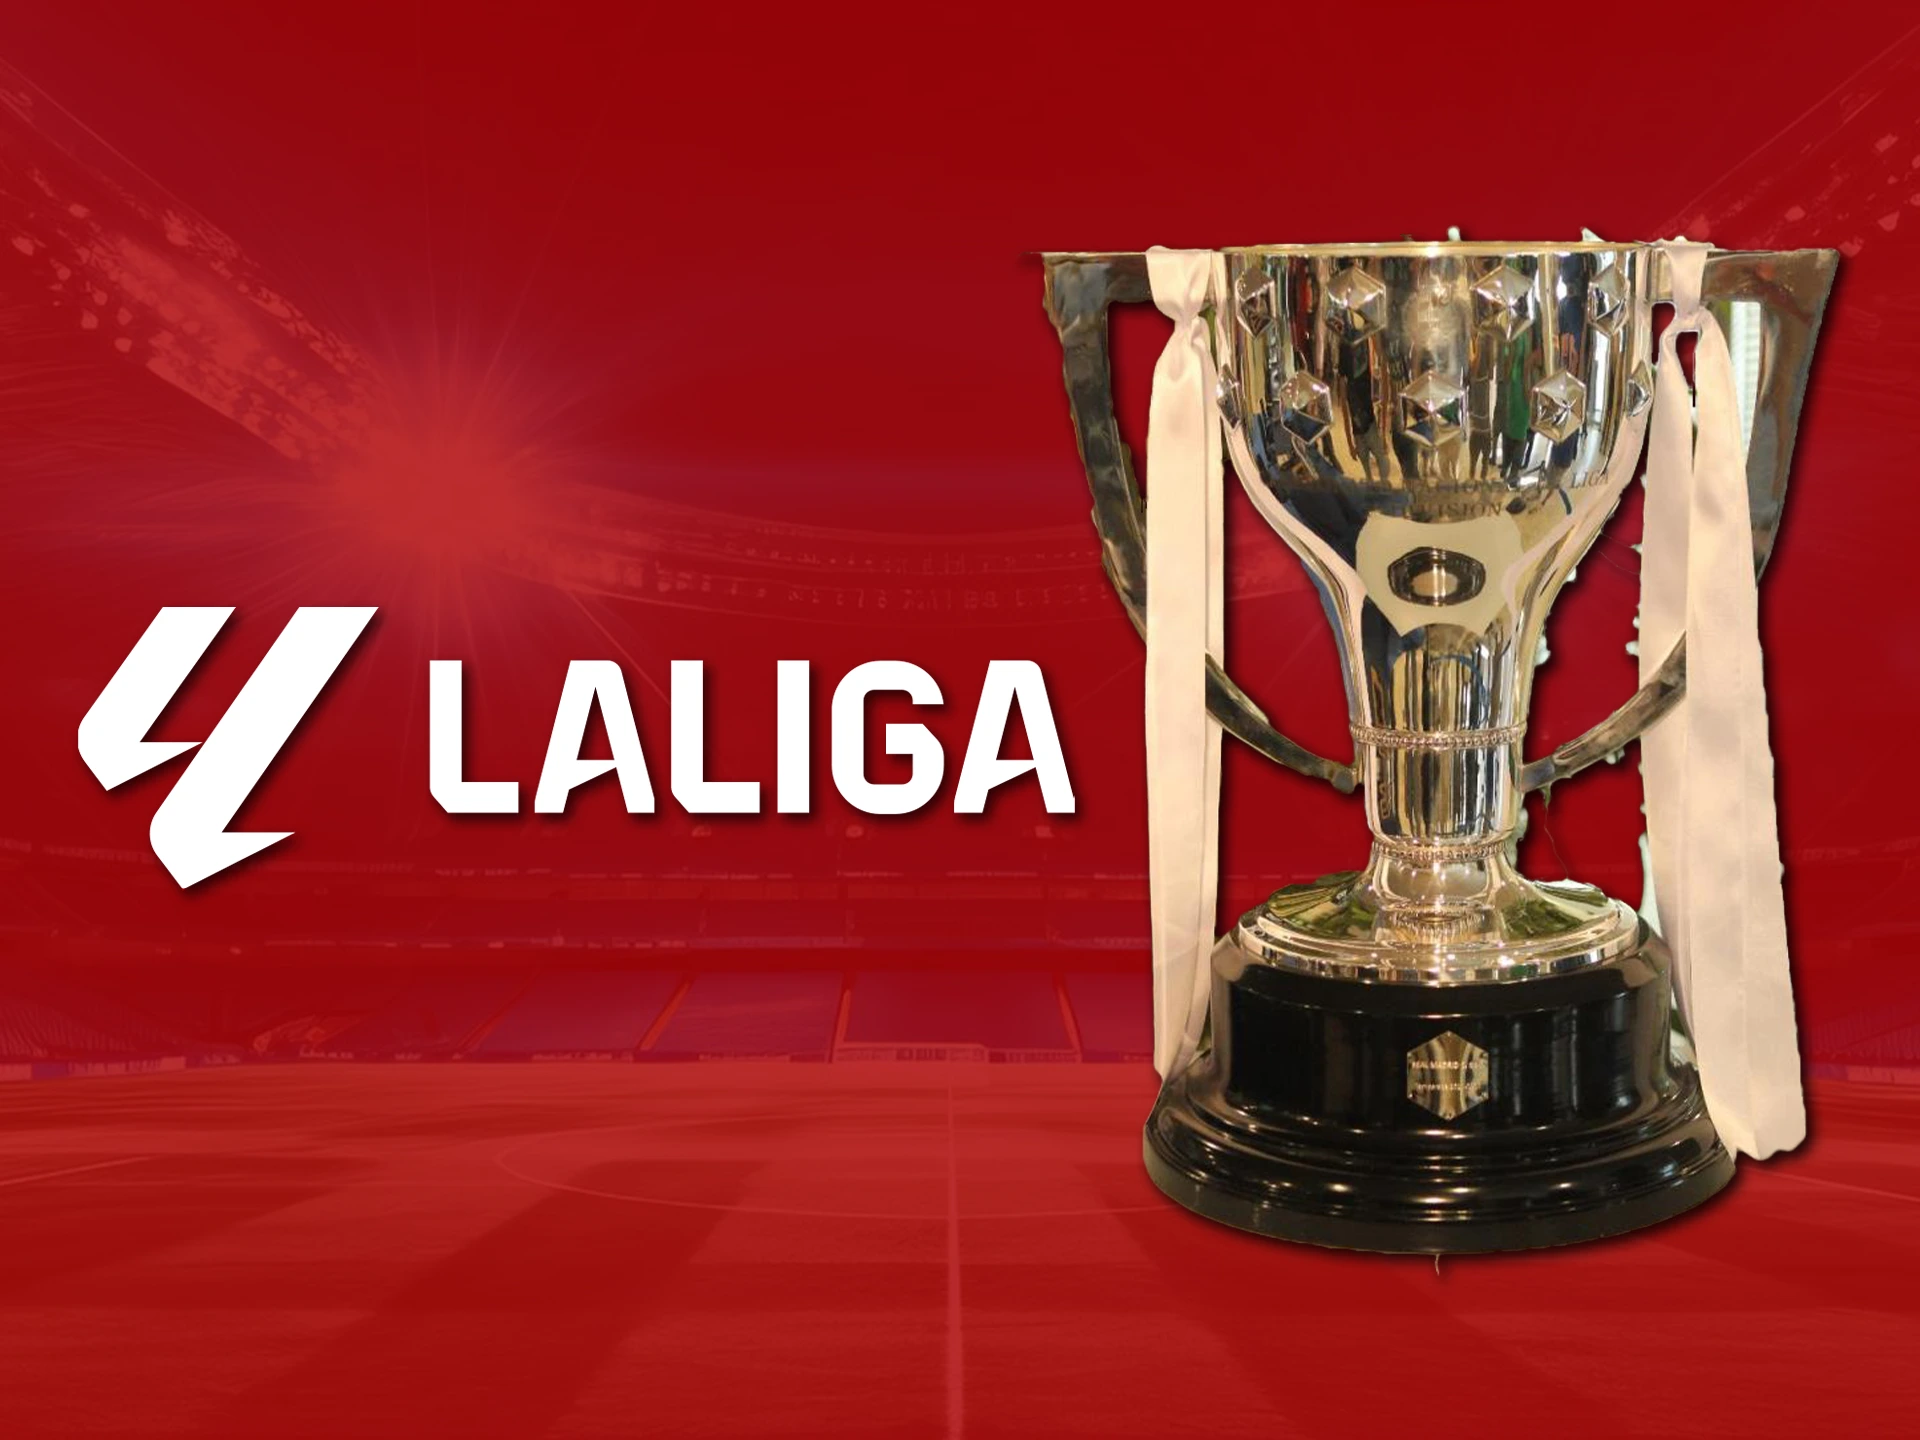 Place your bets on LaLiga and get incredible emotions and a chance to win big.